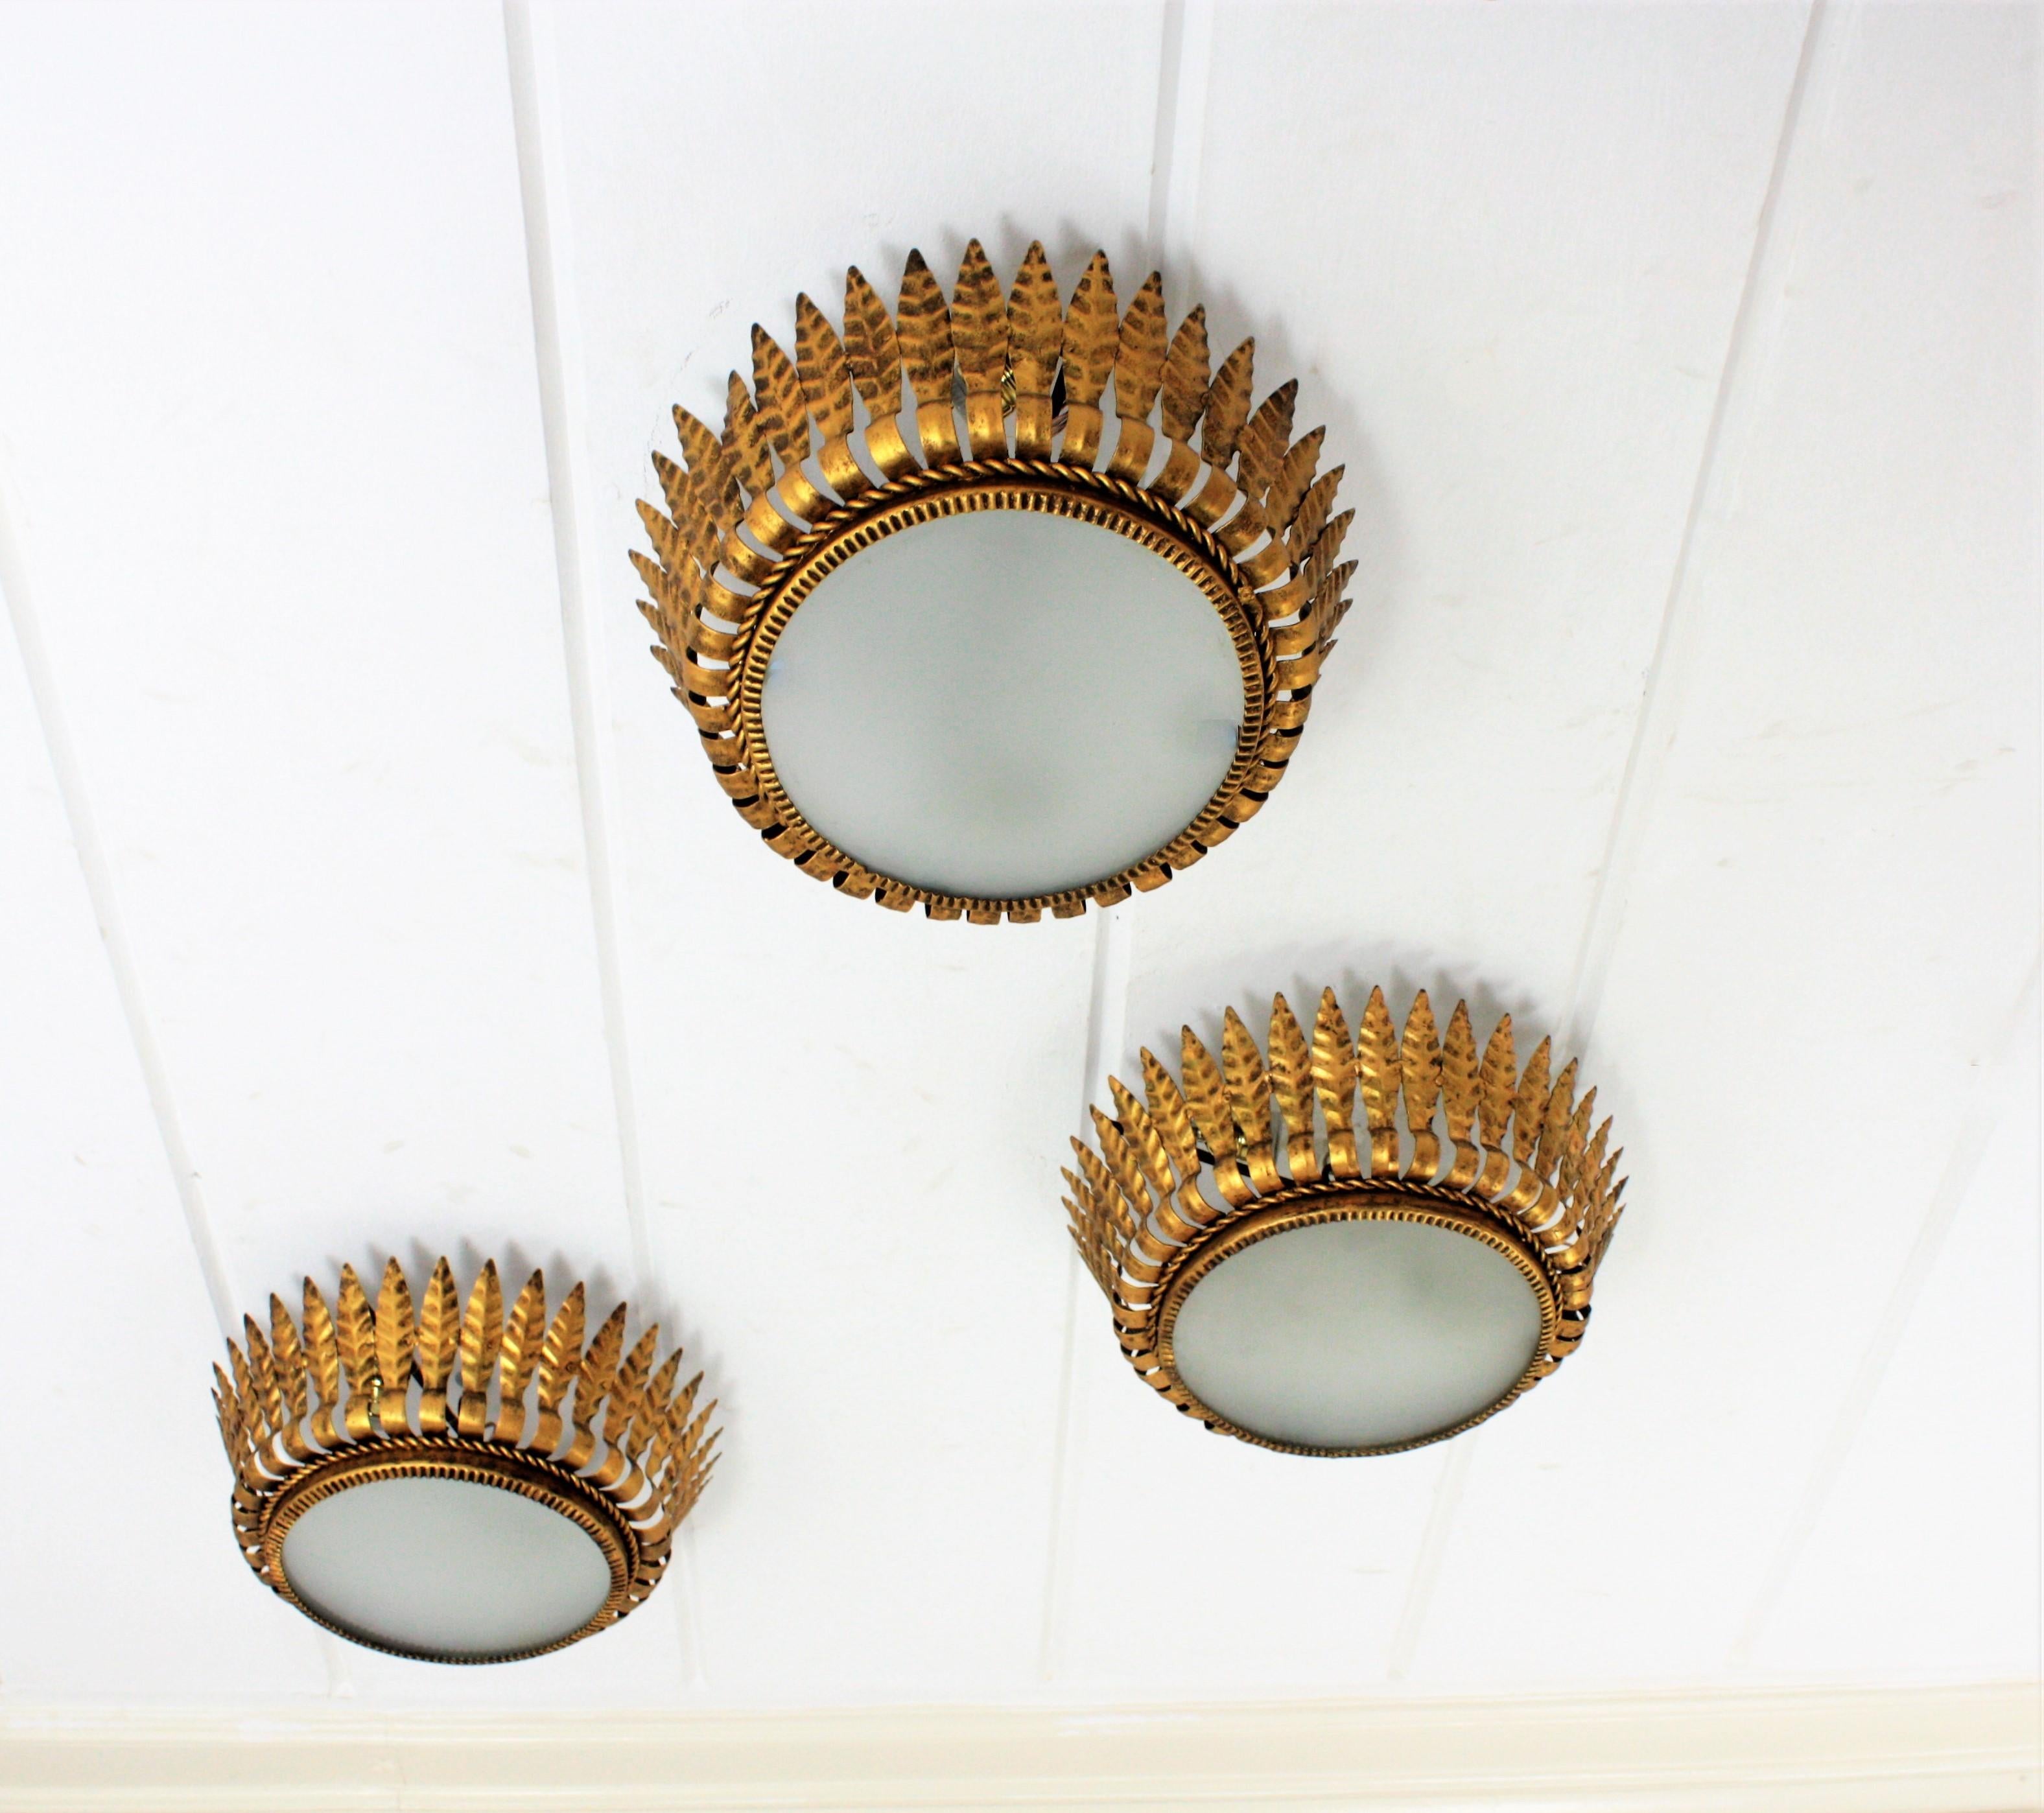 Set of three Spanish Mid-Century Modern gilt iron crown sunburst light fixtures or chandeliers with leaf motifs surrounding a central frosted glass difusser, Spain, 1950s.
All of them have been handcrafted in hand-hammered iron with gold leaf